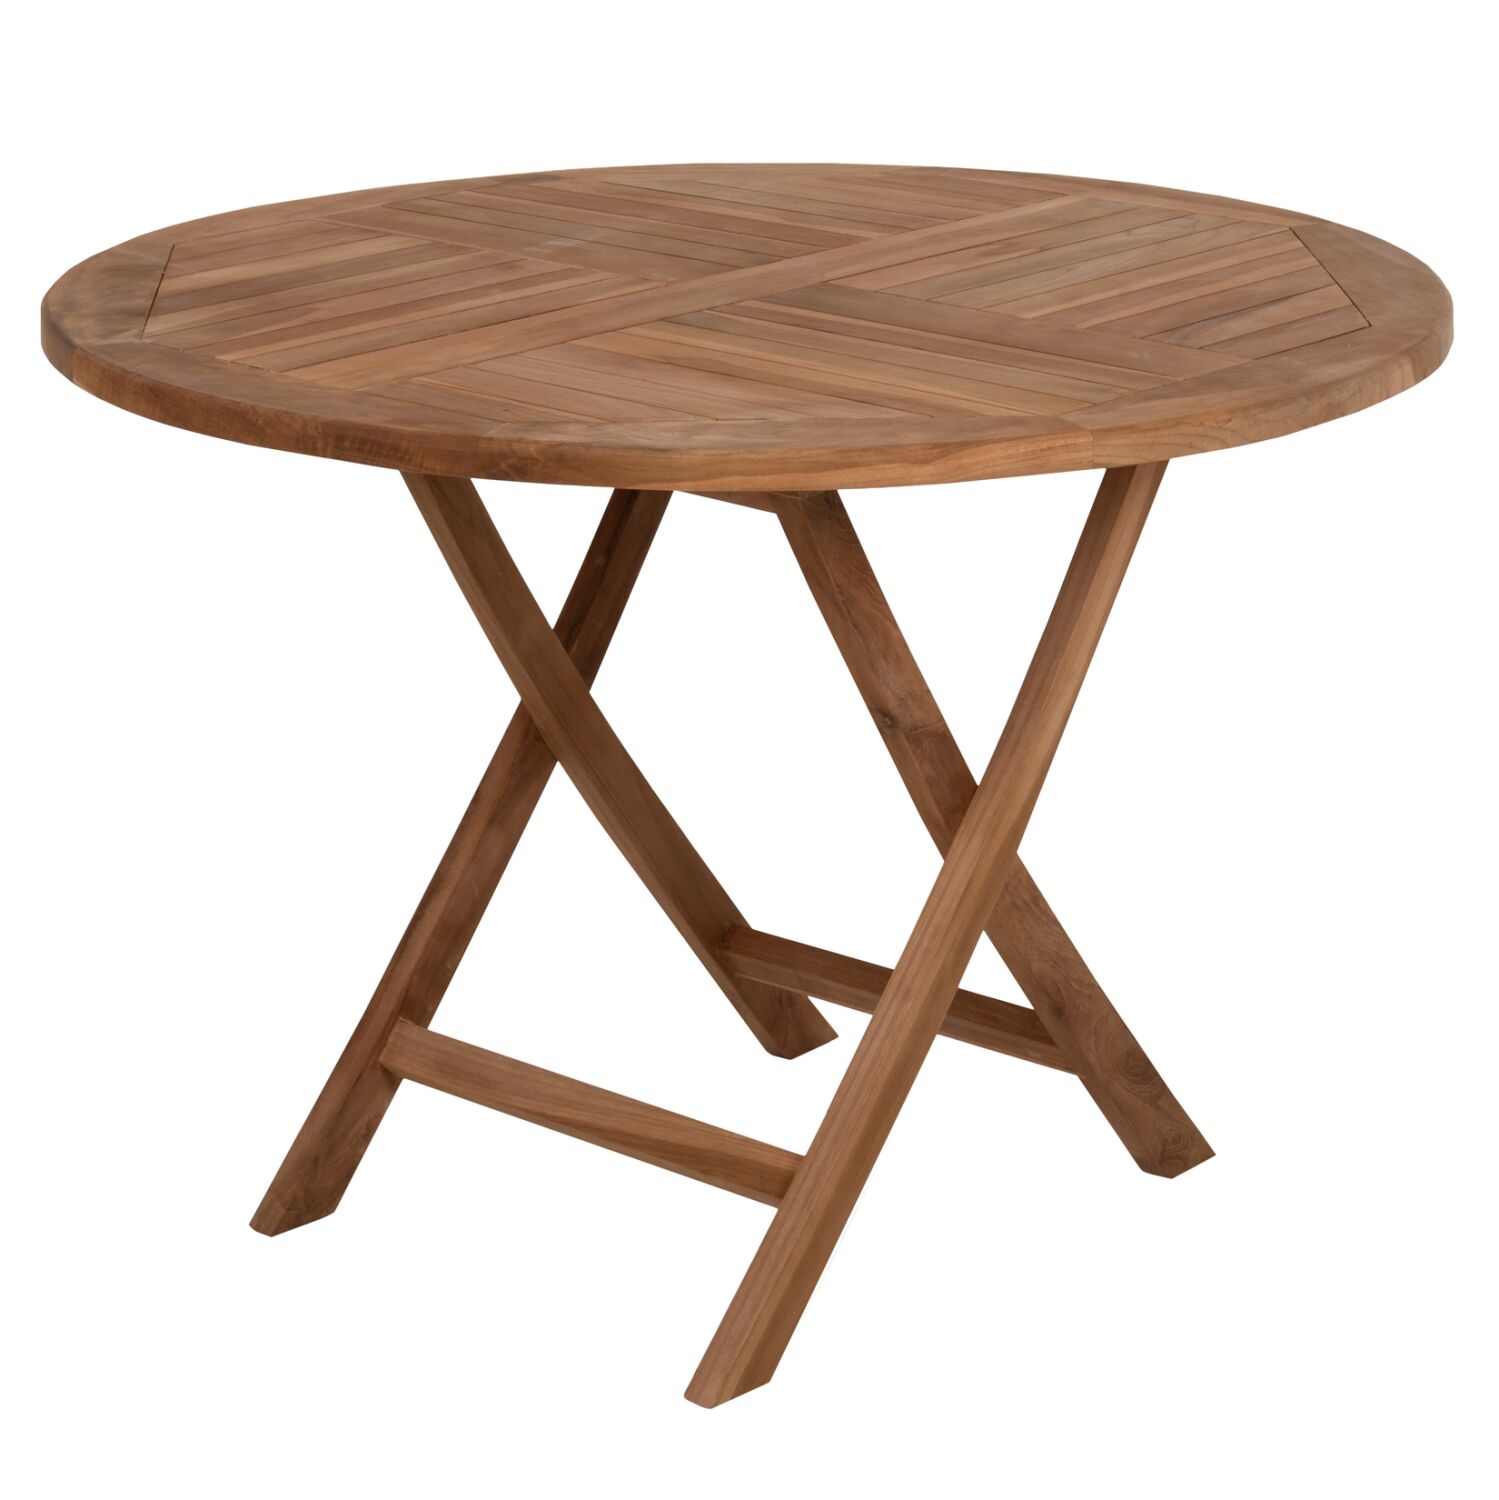 ROUND TABLE FOLDING KENDALL HM9543 TEAK WOOD IN NATURAL COLOR Φ106x73,5Hcm.